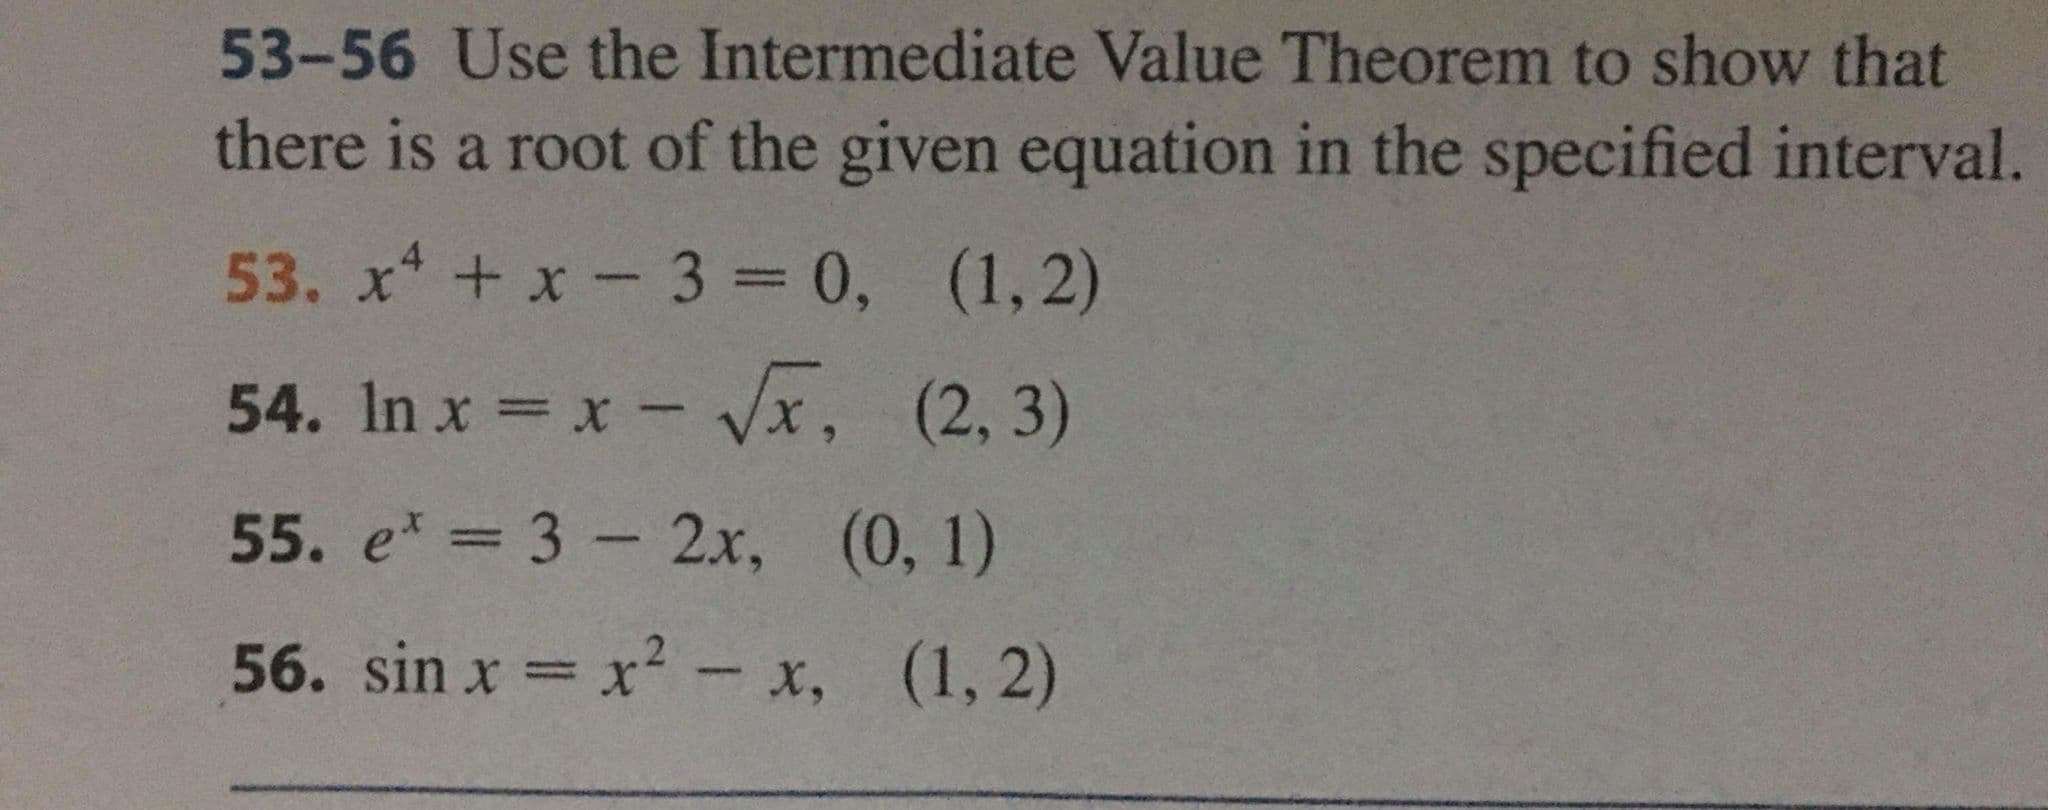 53-56 Use the Intermediate Value Theorem to show that
there is a root of the given equation in the specified interval.
53. x* + x - 3 = 0,
(1,2)
54. In x = x - Vx, (2, 3)
55. e* %3D 3 - 2х, (0, 1)
|3|
56. sin x = x? - x, (1, 2)
